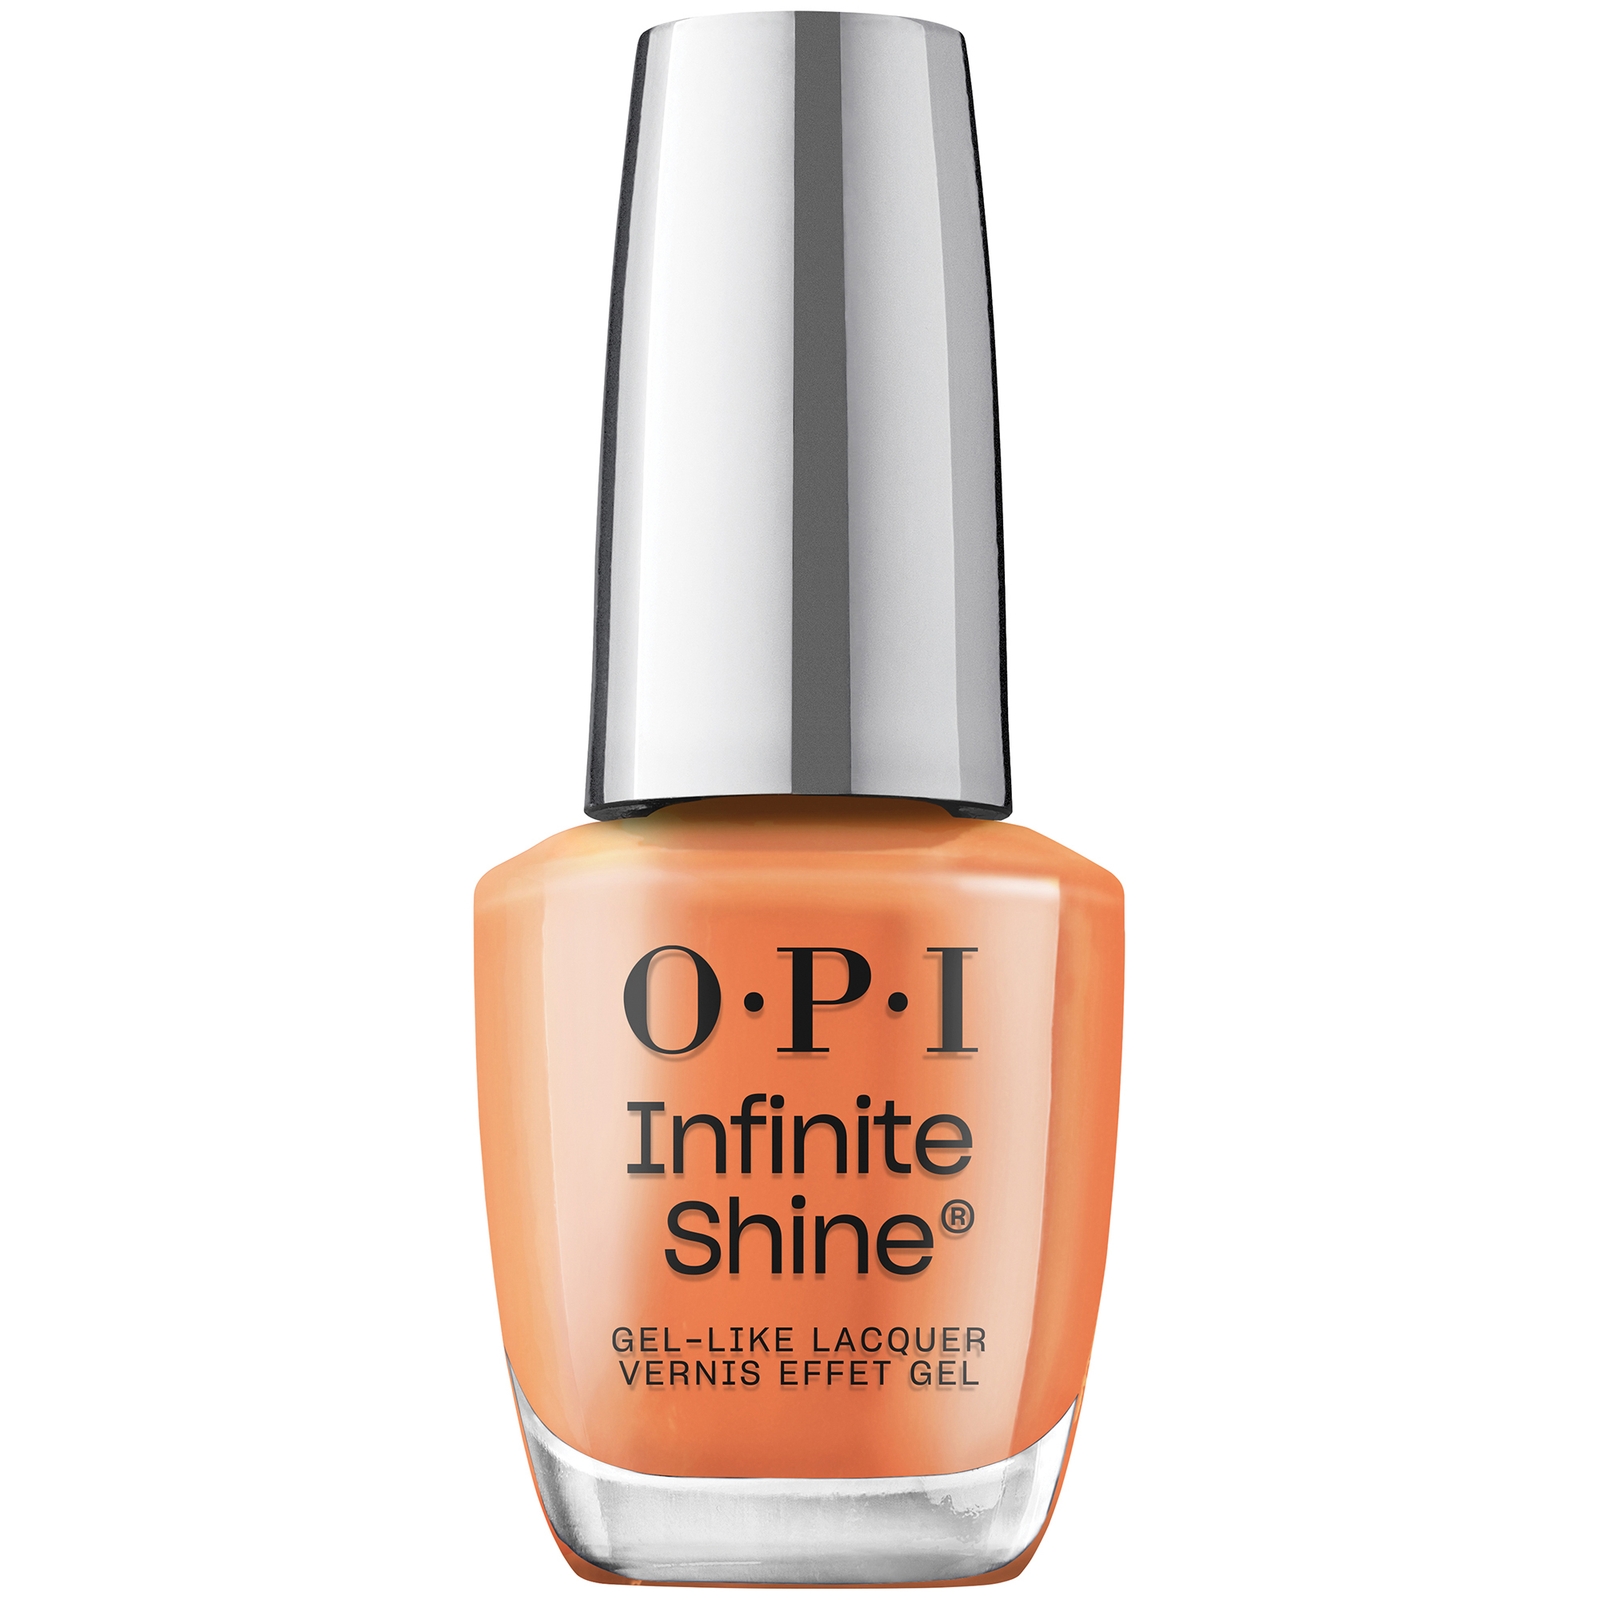 Opi Infinite Shine Long-wear Nail Polish - Bright On Top Of It 15ml In White